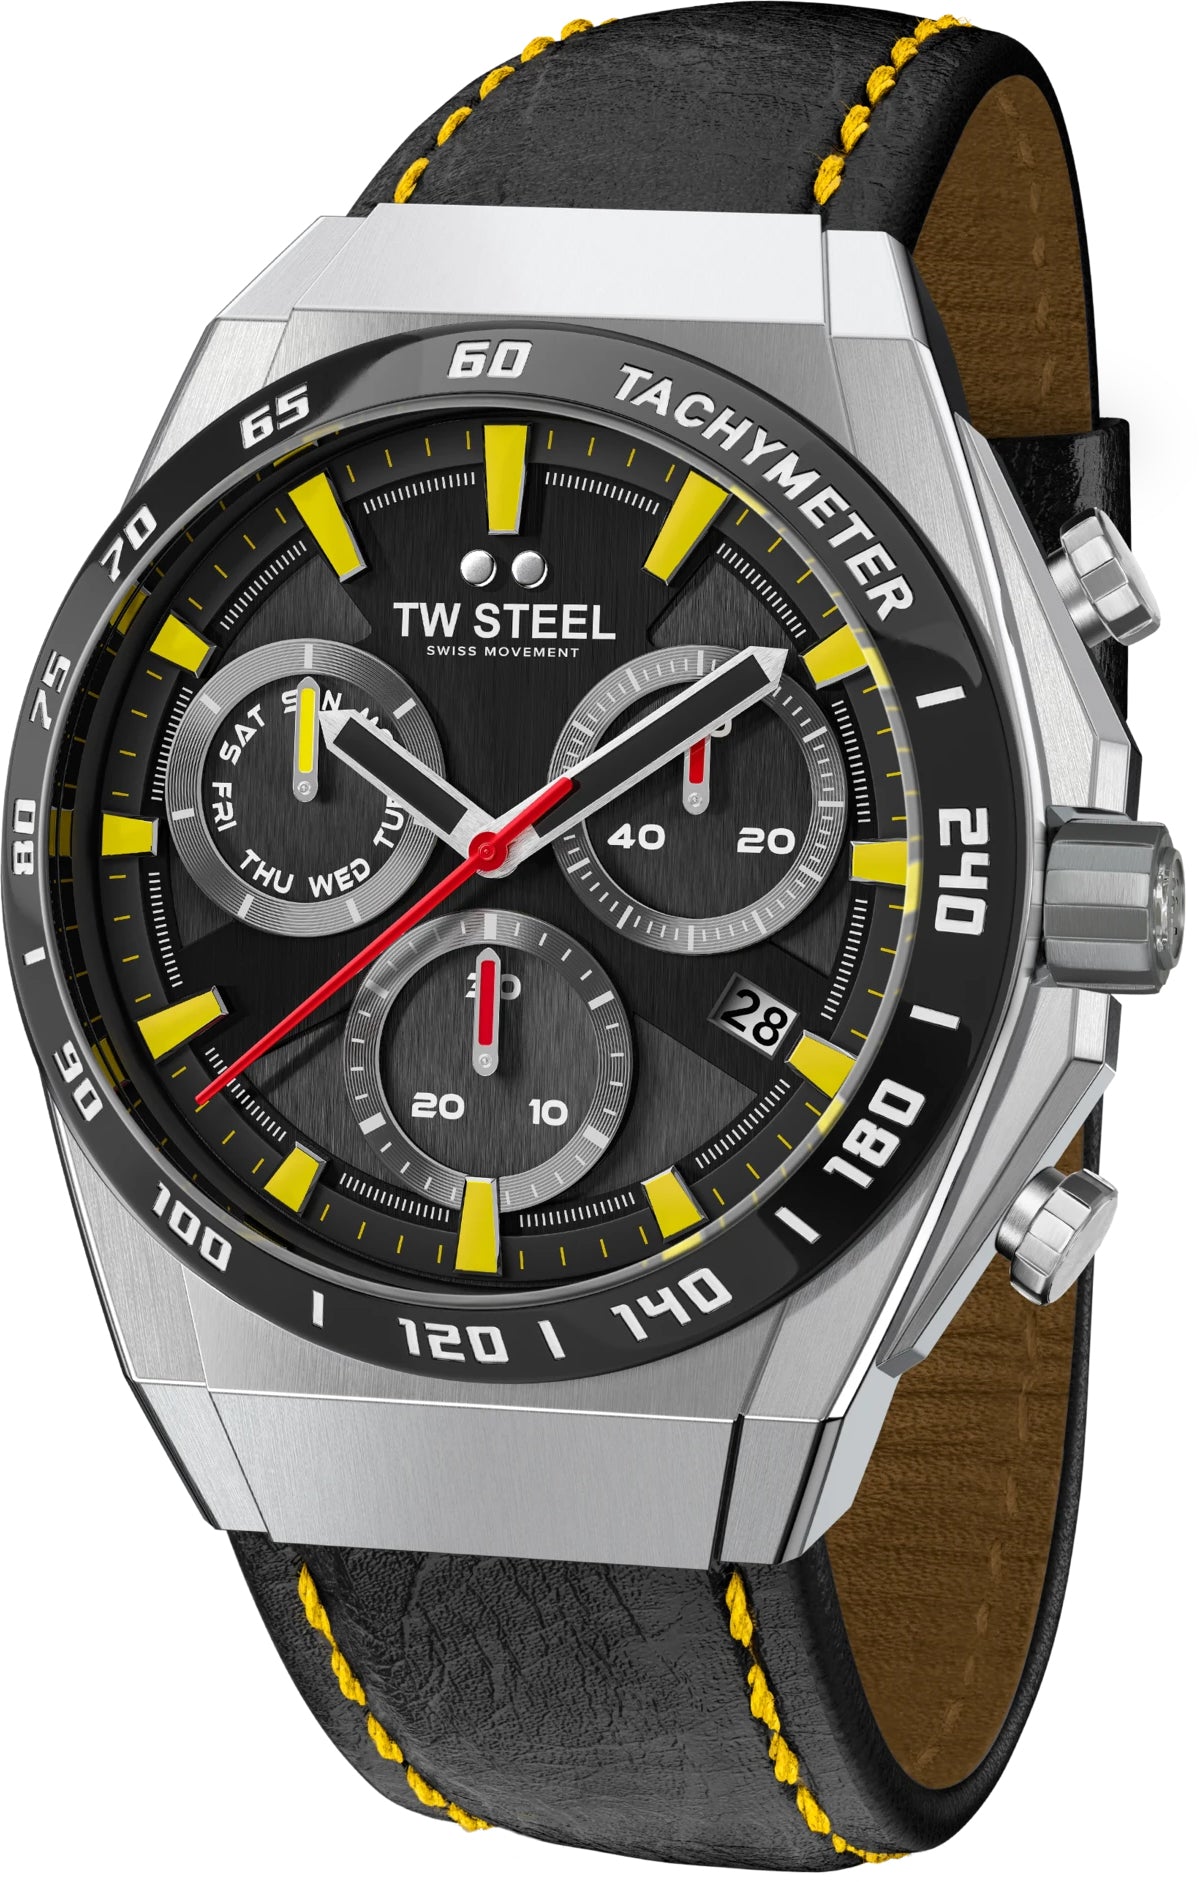 Tw Steel Watch Fast Lane Ceo Tech Special Edition